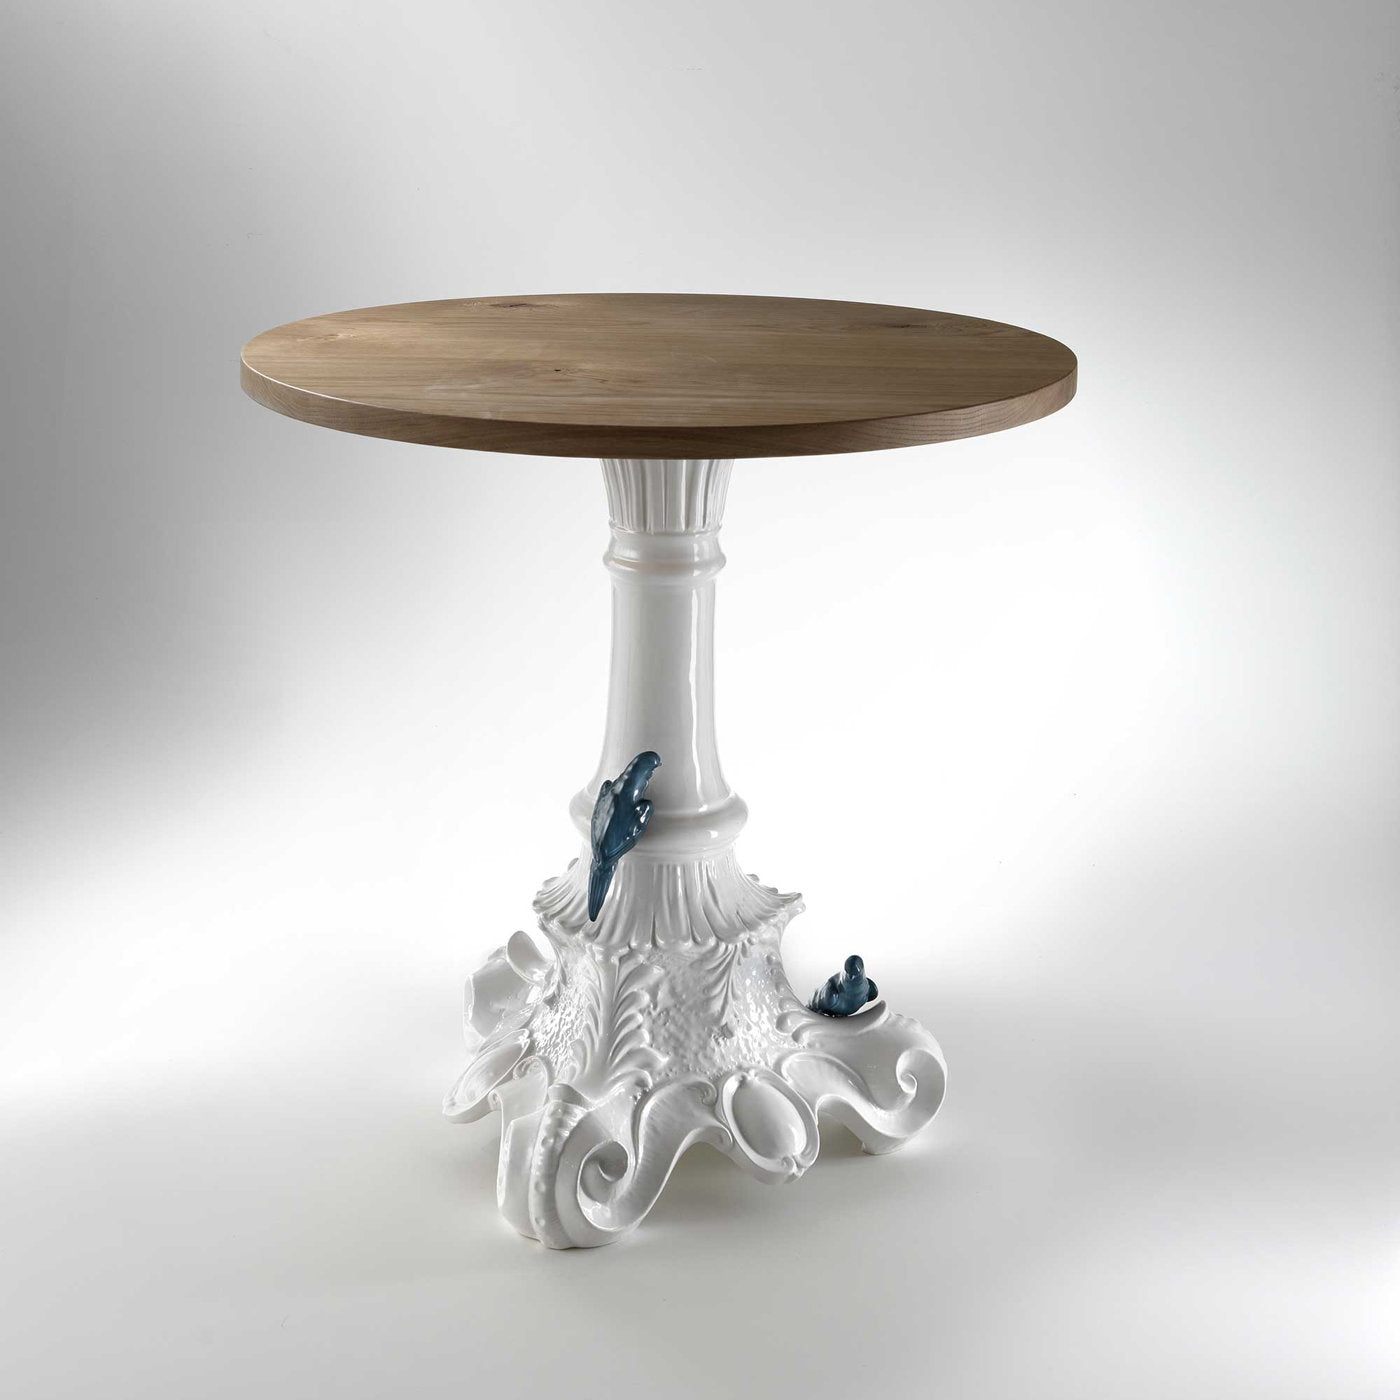 White Place Me Table In Natural Oak - Alternative view 1